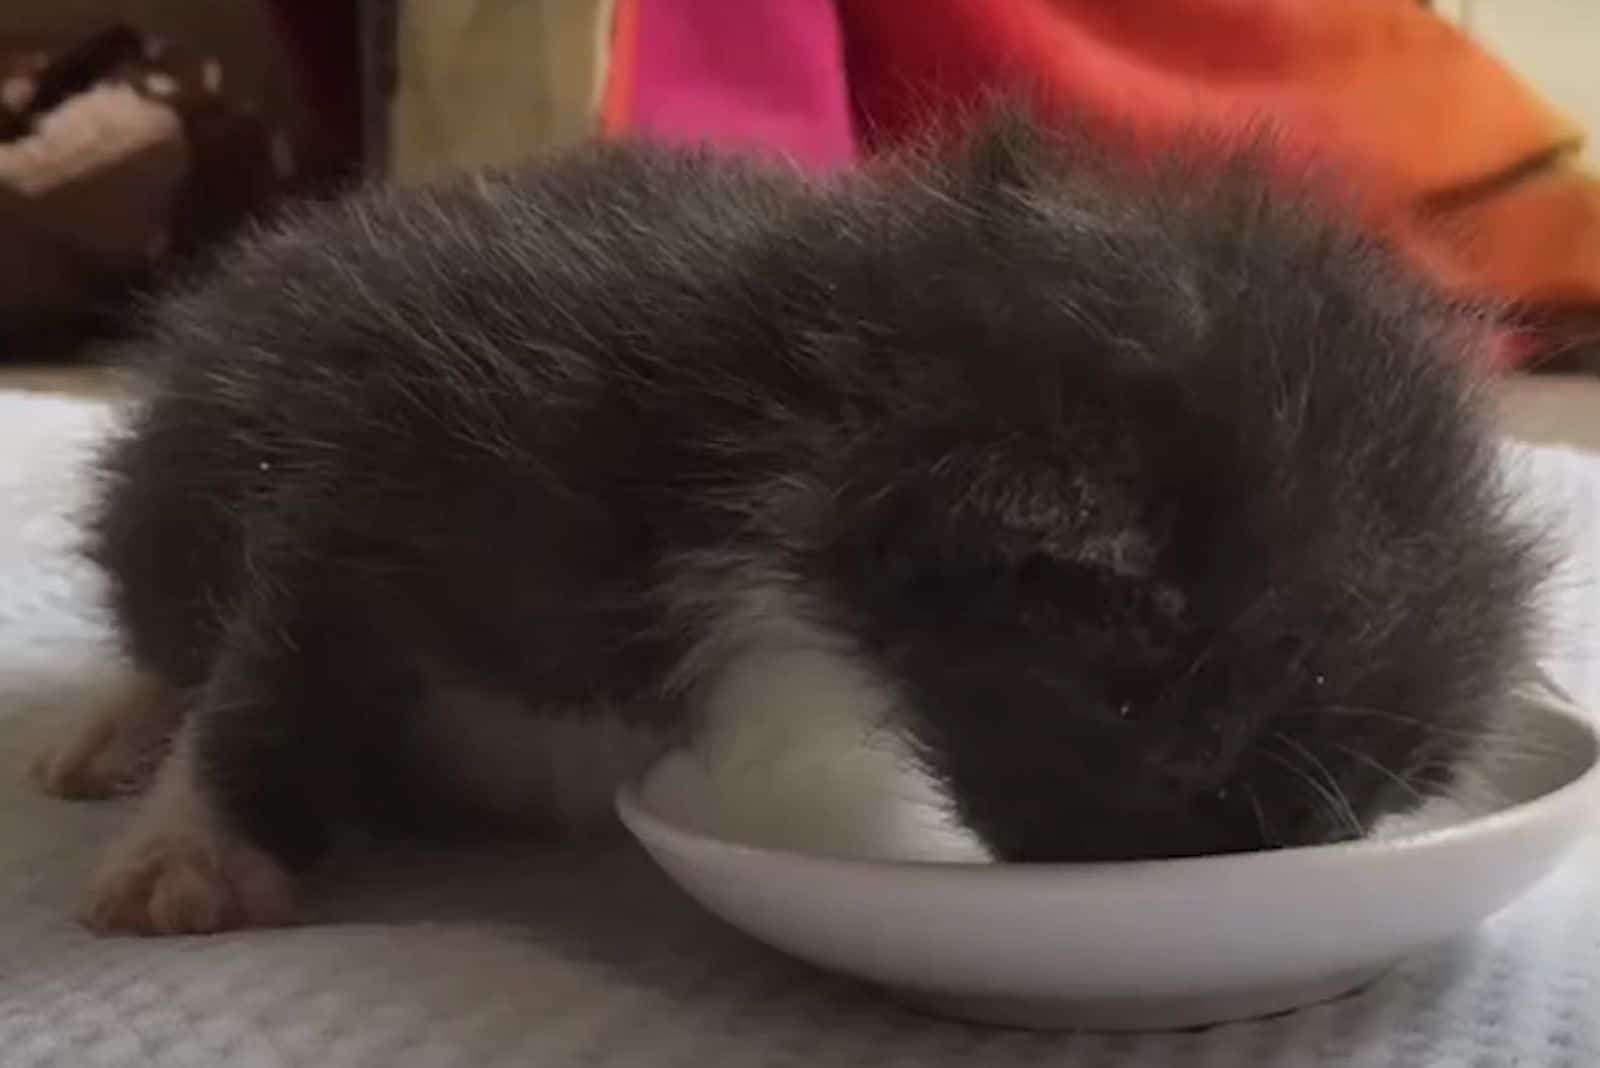 the kitten eats from a white bowl